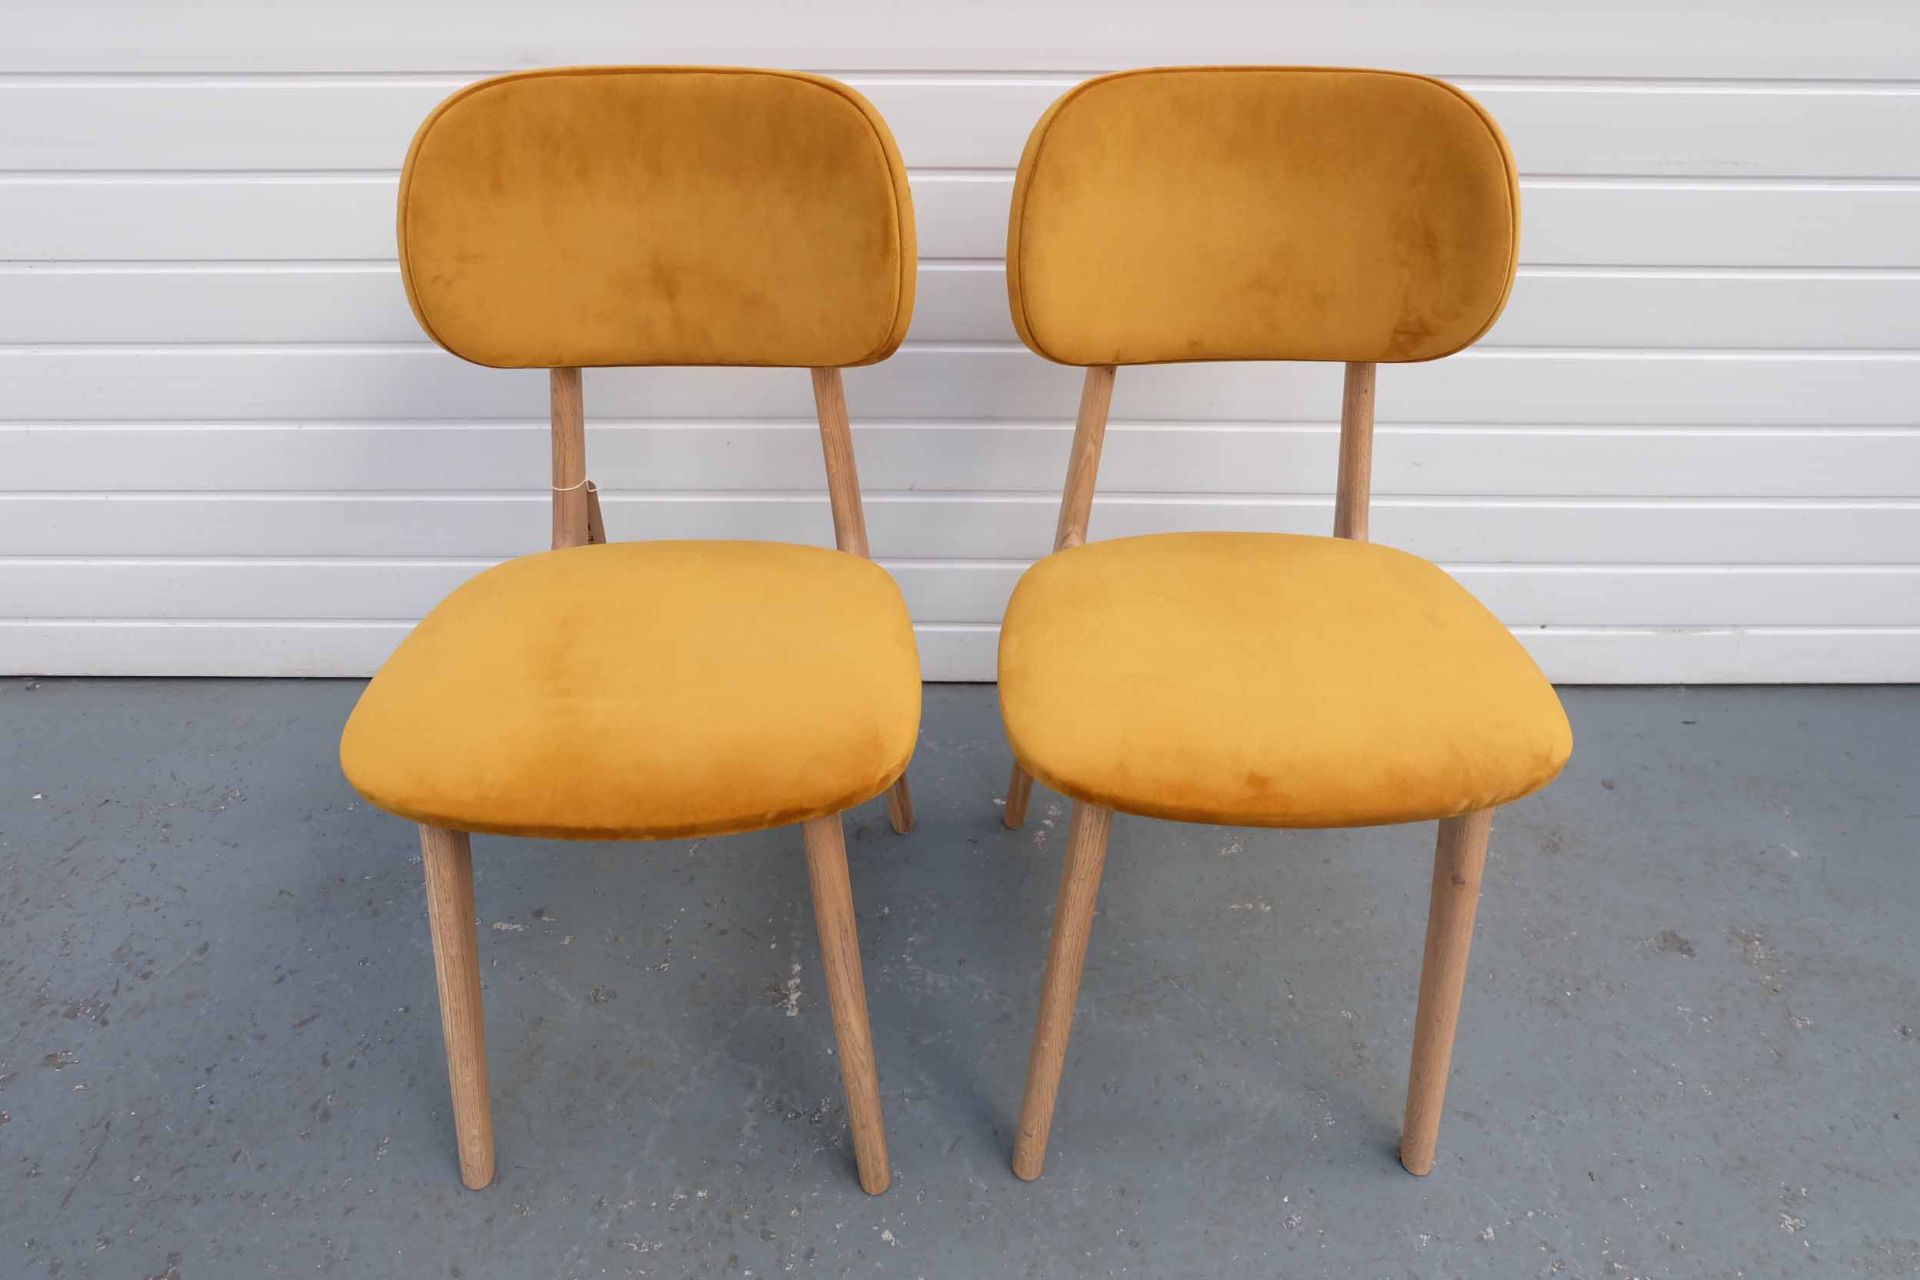 Pair of Carton Furniture 'Bari' Dining Chairs. Upholstered Seat and Back in Mustard Velvet. Fitted o